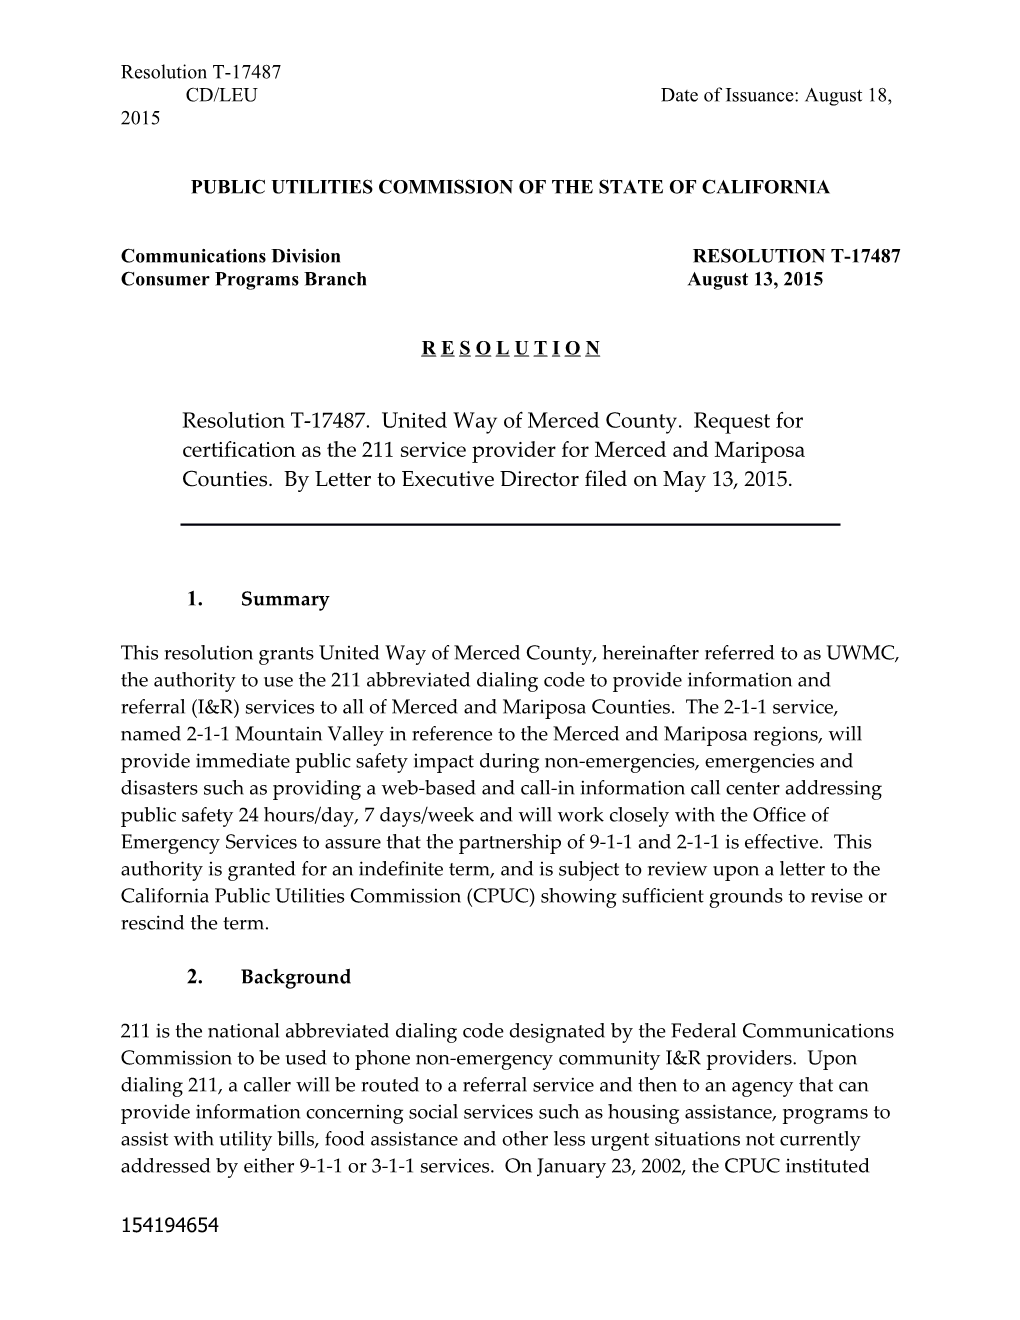 Public Utilities Commission of the State of California s65